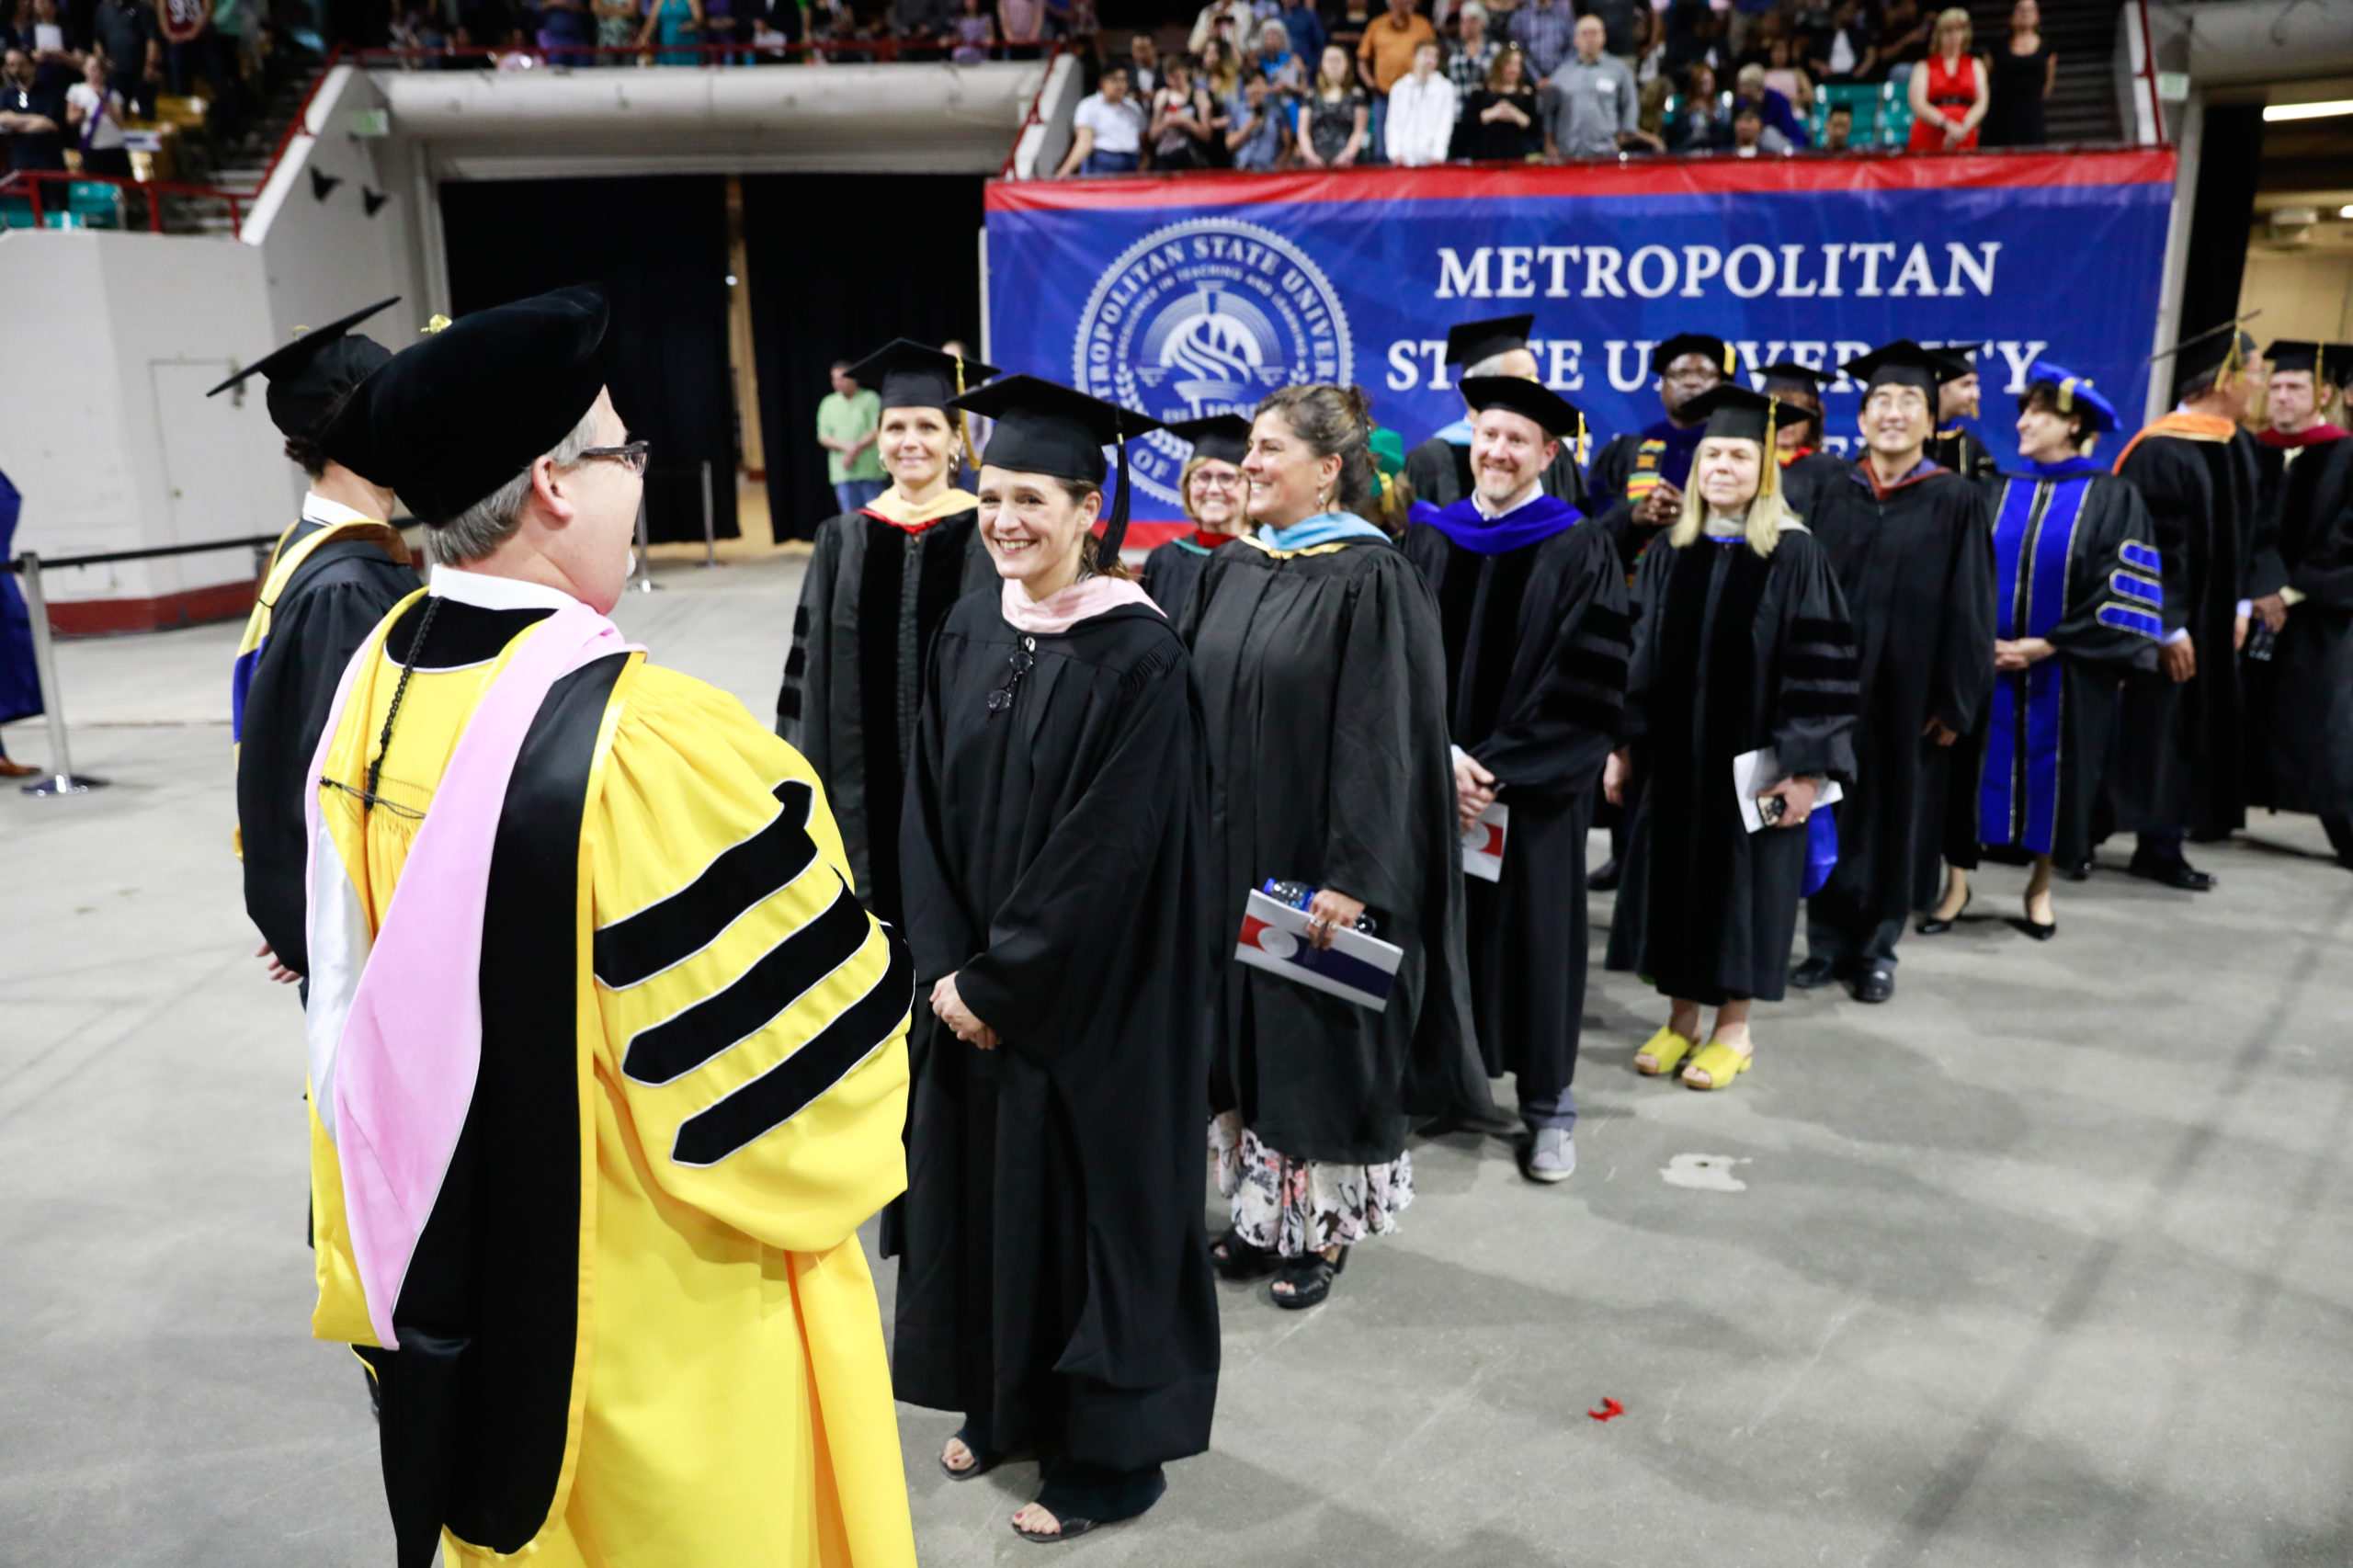 Faculty lining up at the commencement ceremony